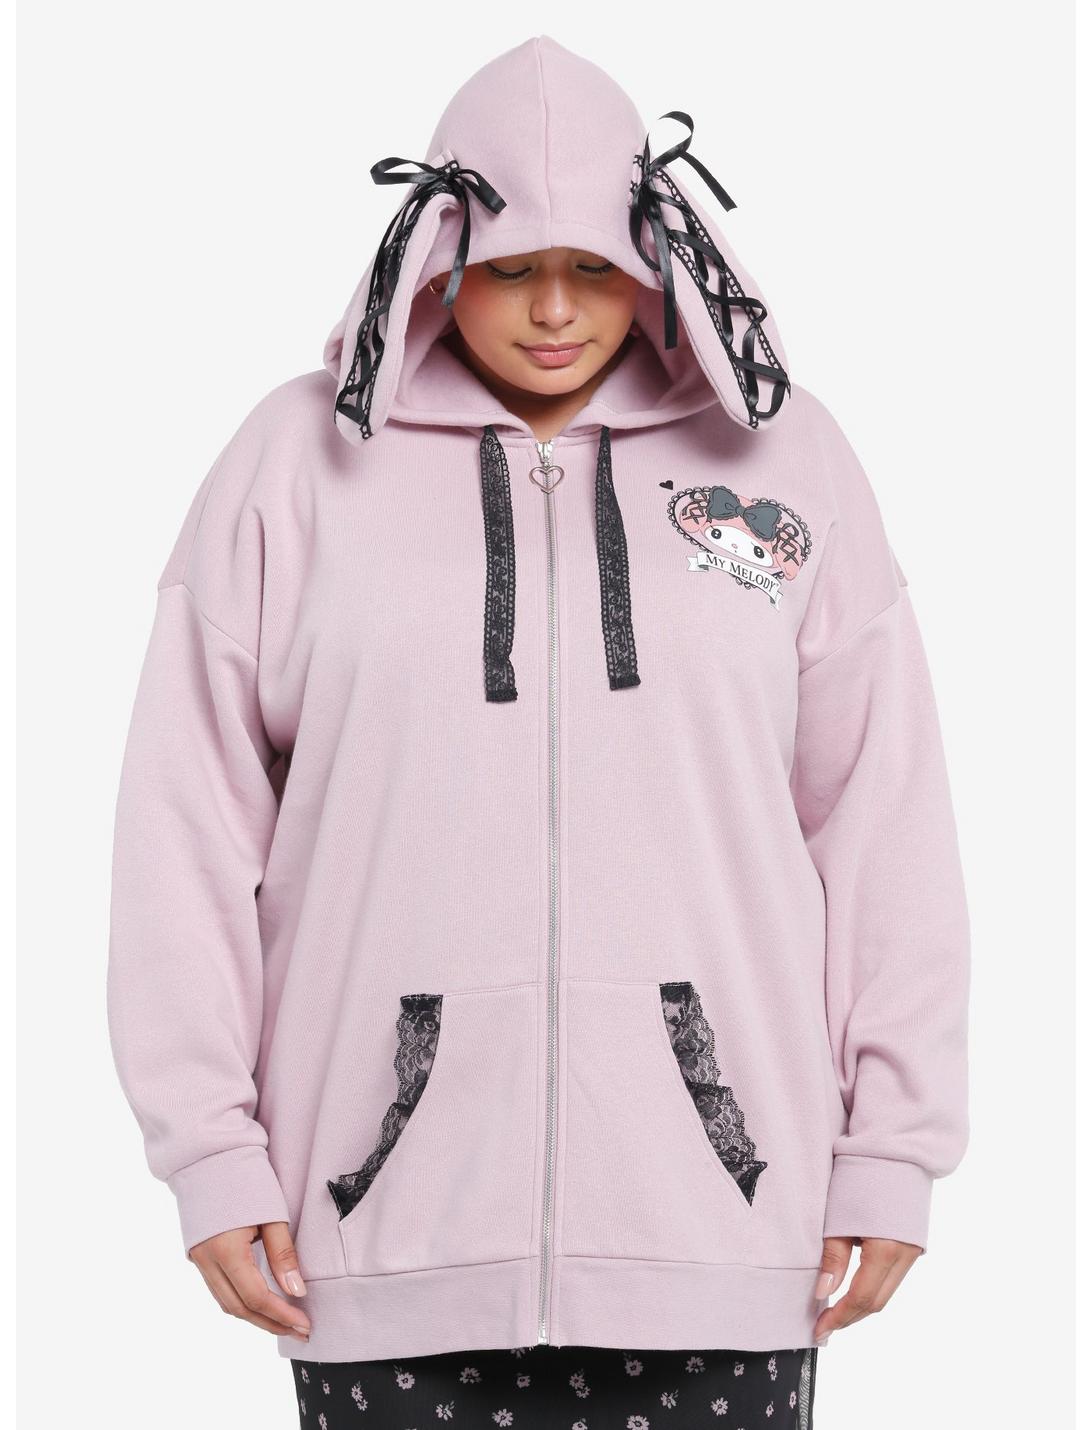 My Melody Lolita Lace 3D Ear Girls Hoodie Plus Size, MULTI, hi-res